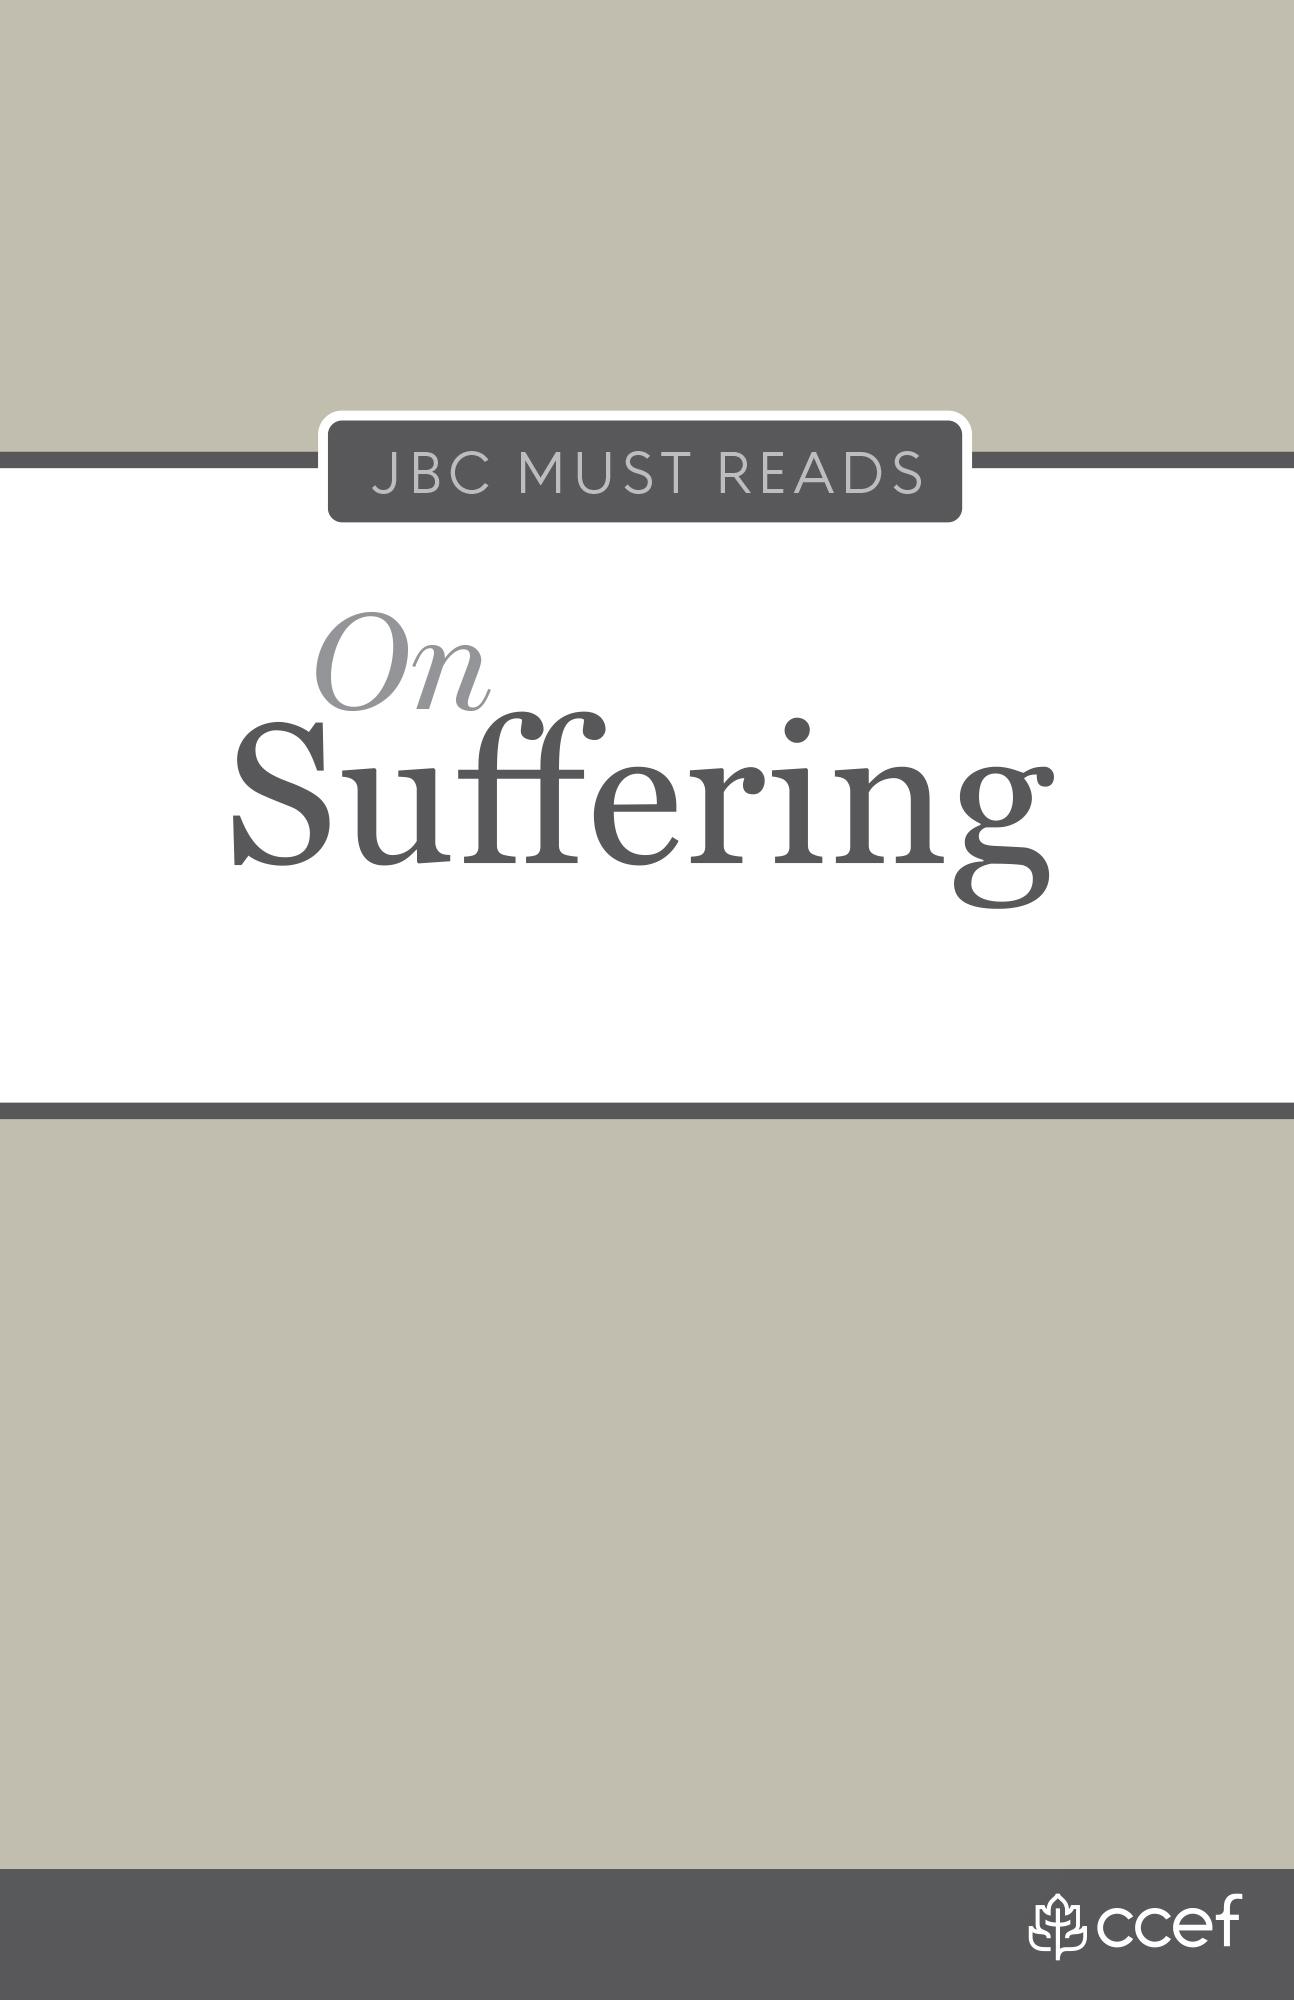 JBC Must Reads: On Suffering Featured Image